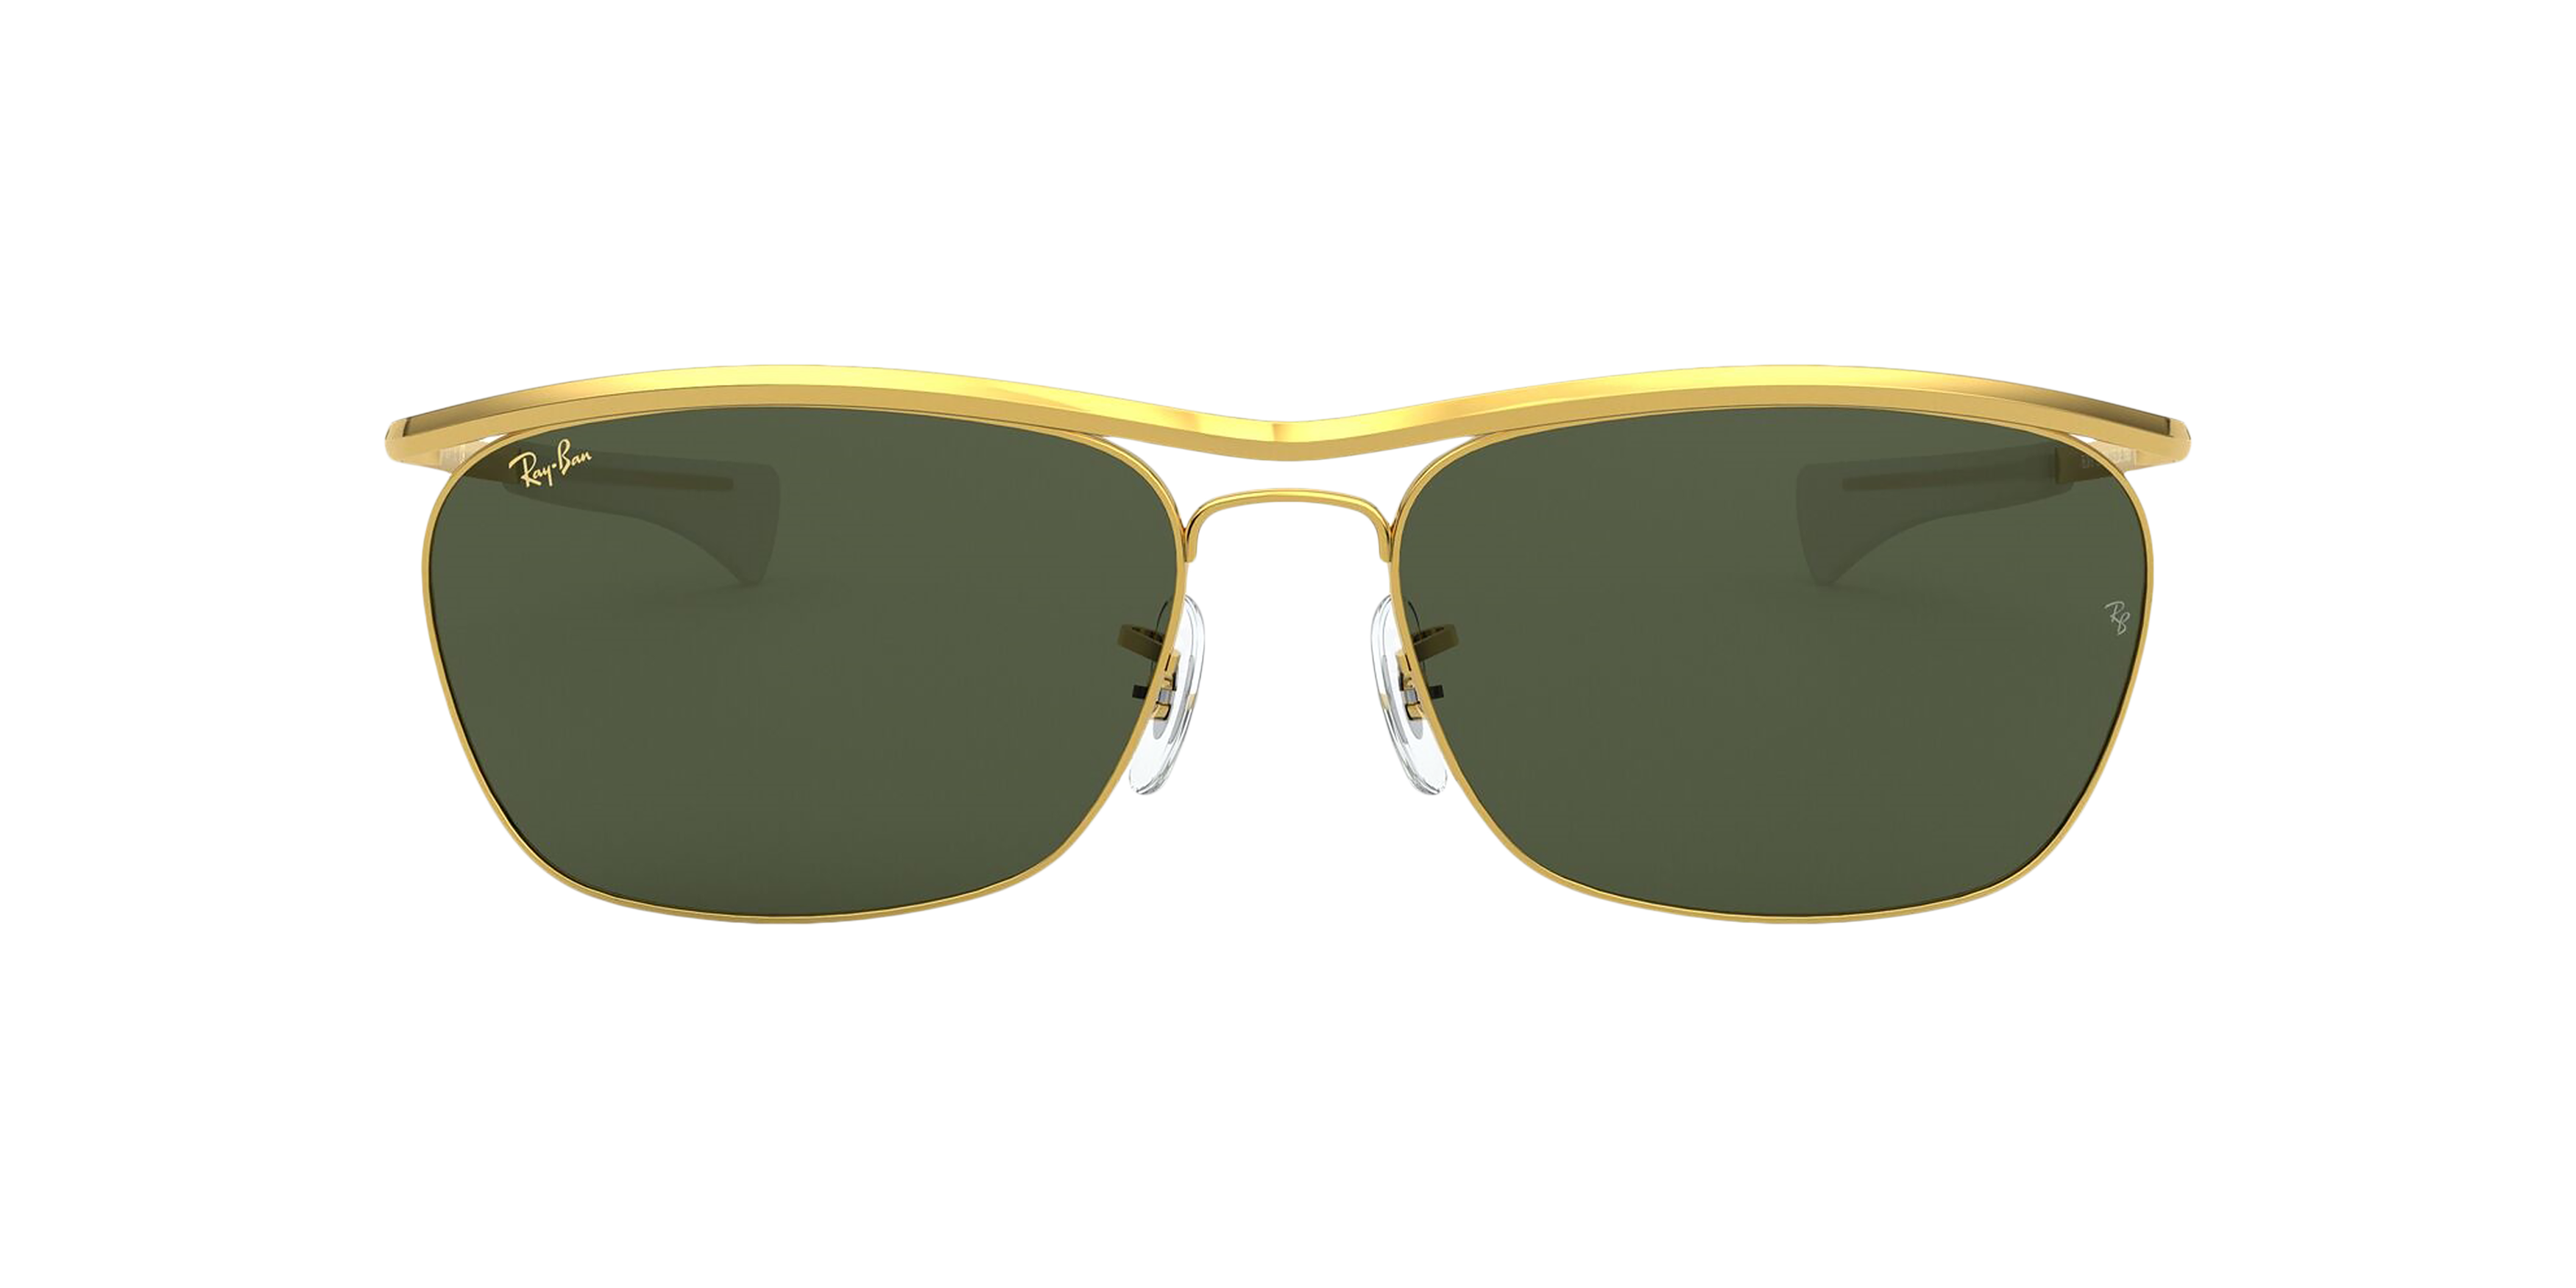 [products.image.front] Ray-Ban Olympian II Deluxe RB3619 919631